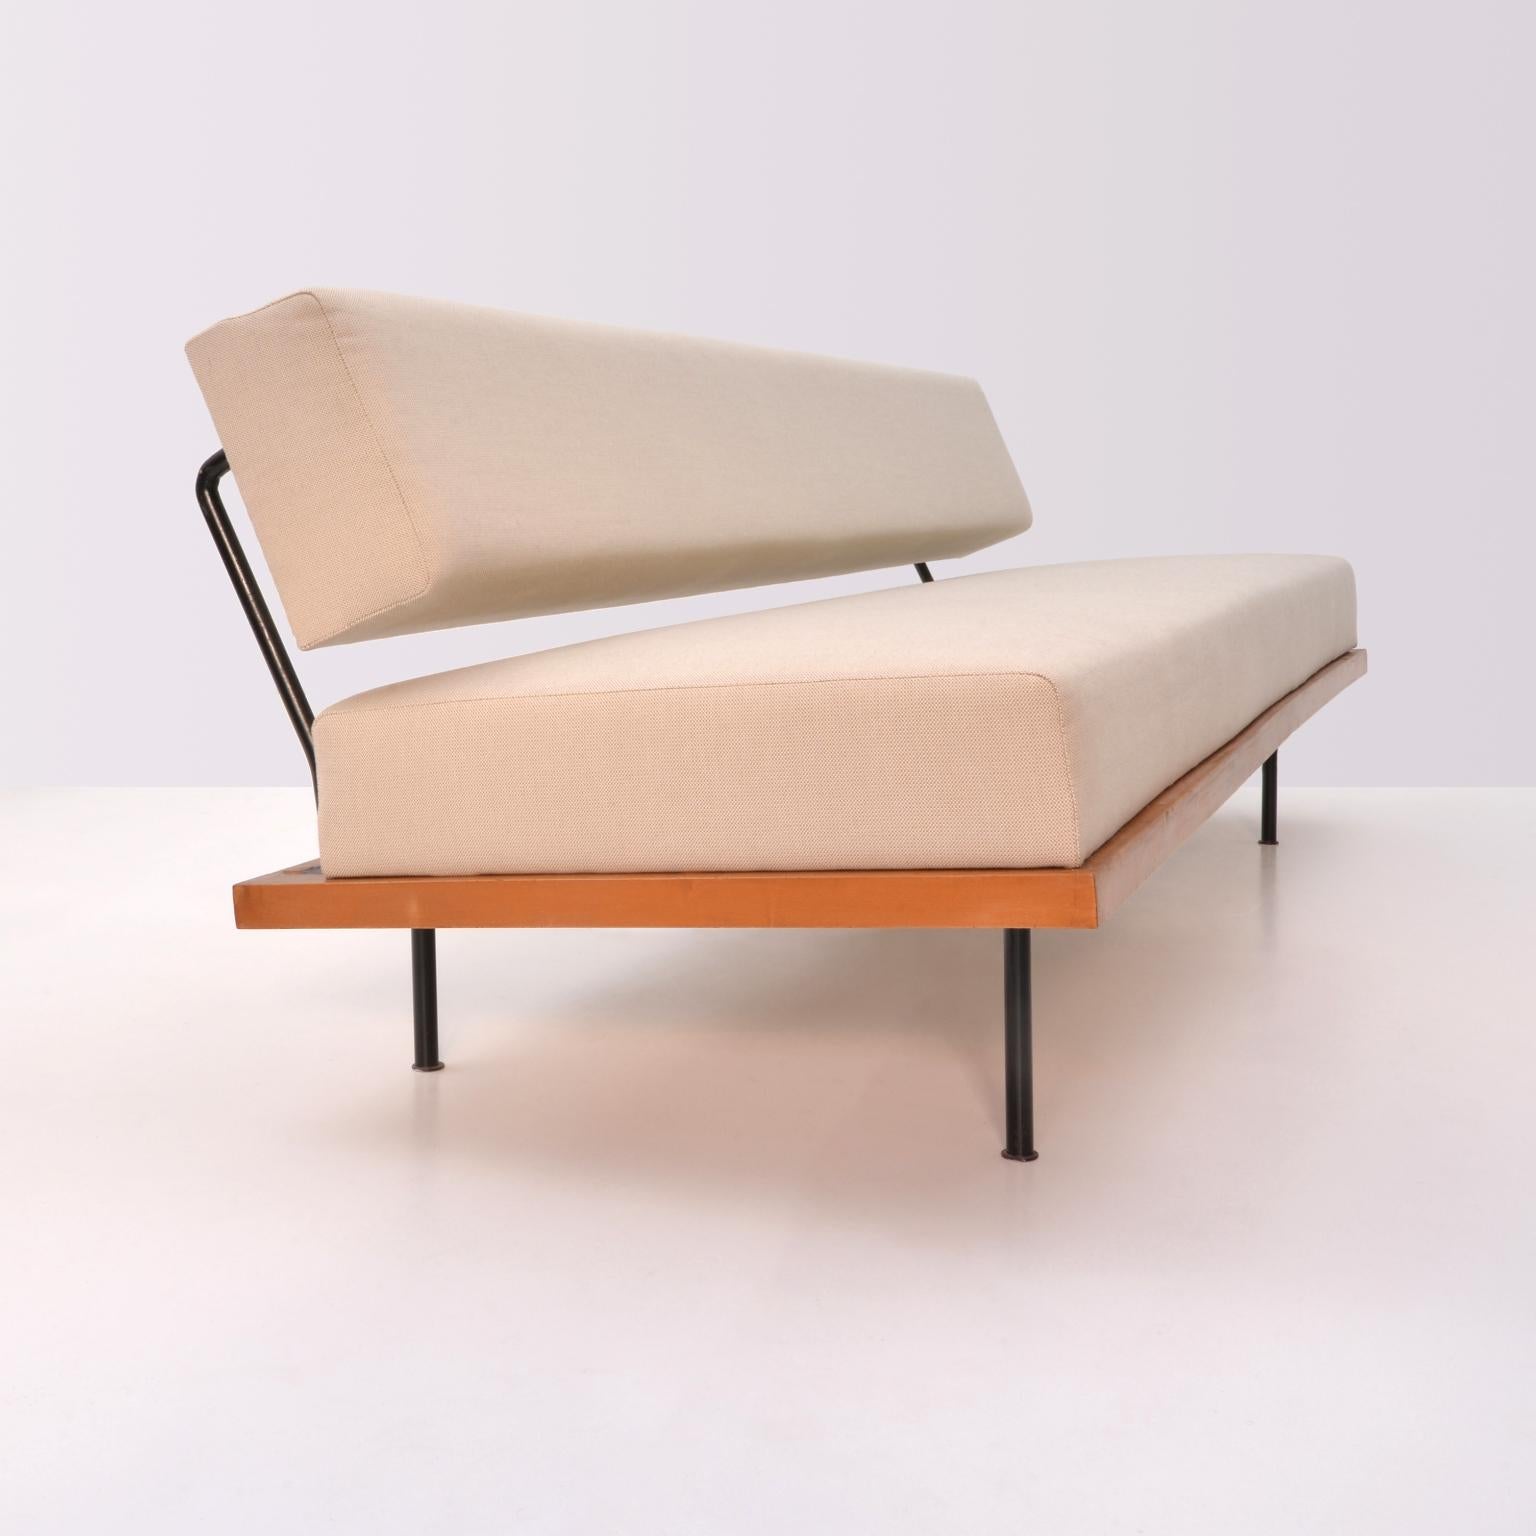 German Minimalist Couch/Daybed by Florence Knoll, Wooden Frame, Reupholstered, ca. 1960